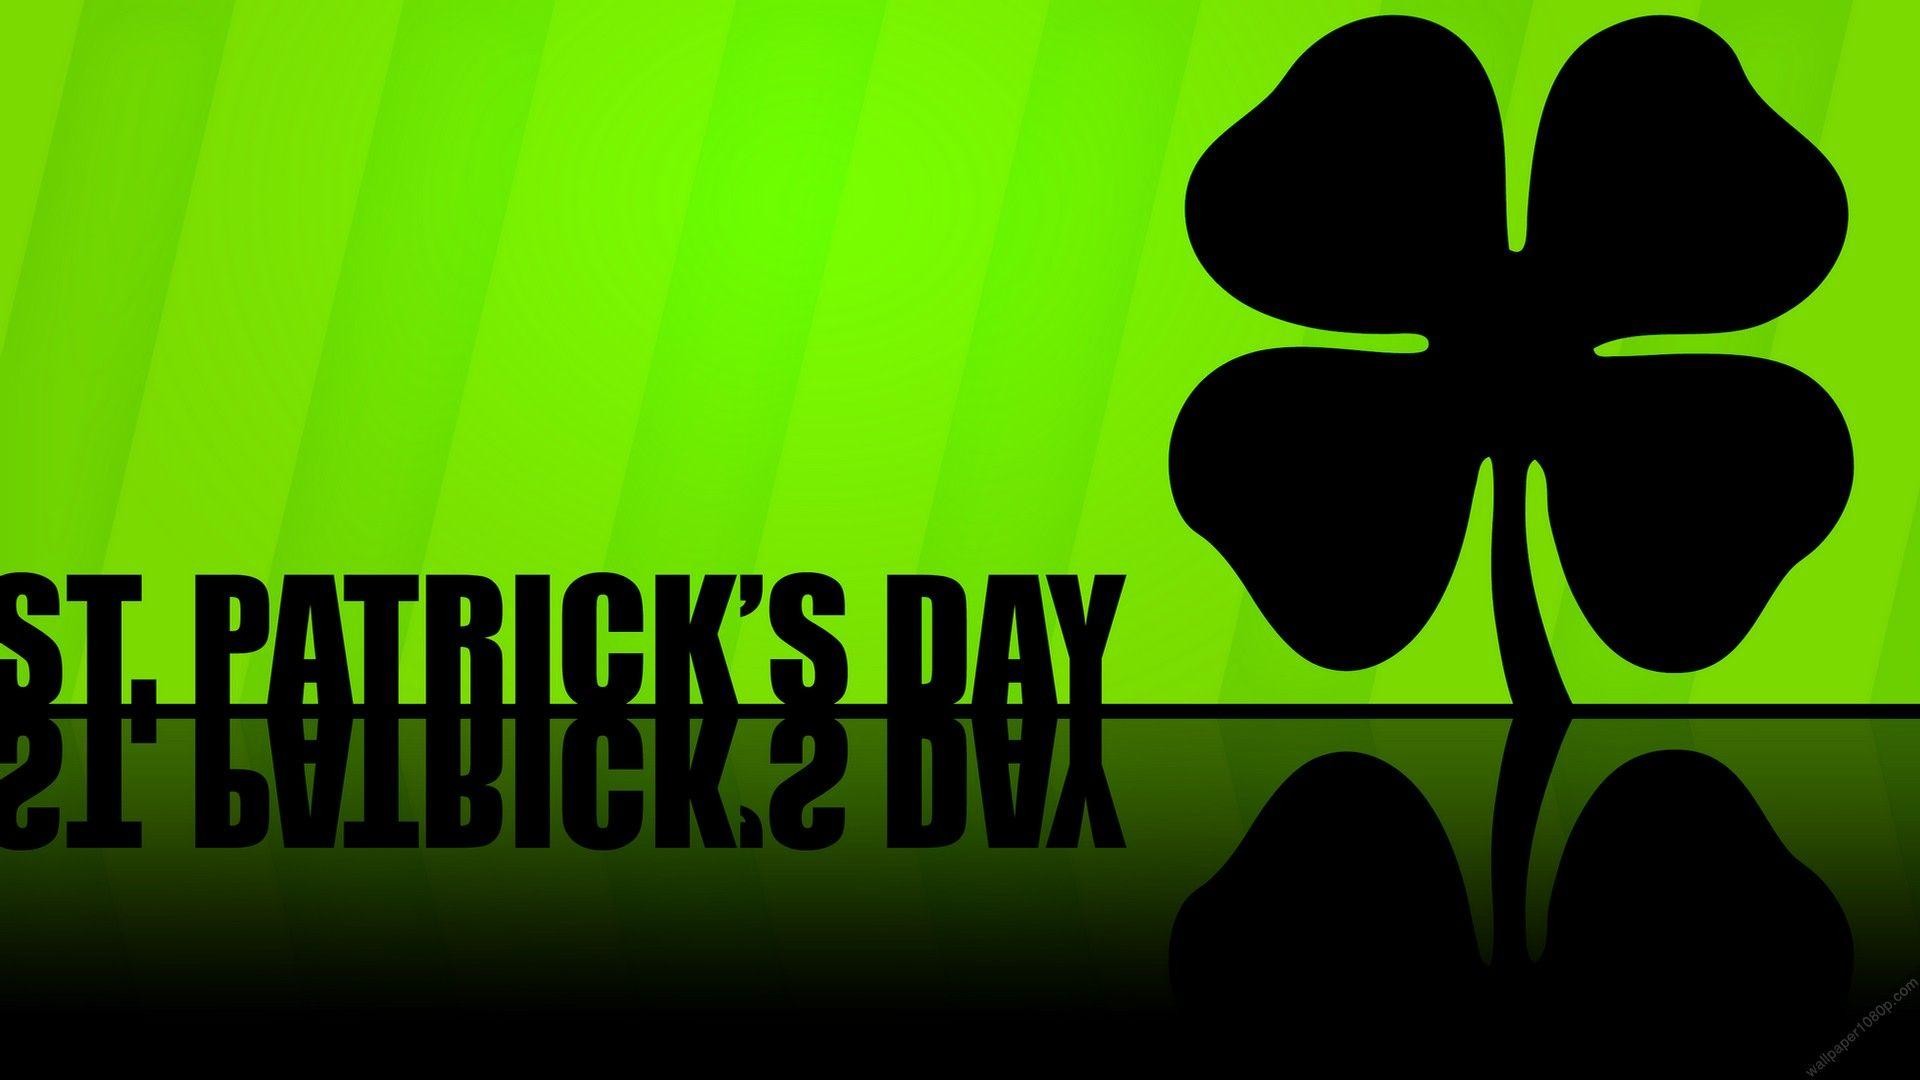 1920x1080 42 best images about St. Patrick's Day Wallpaper on Pinterest